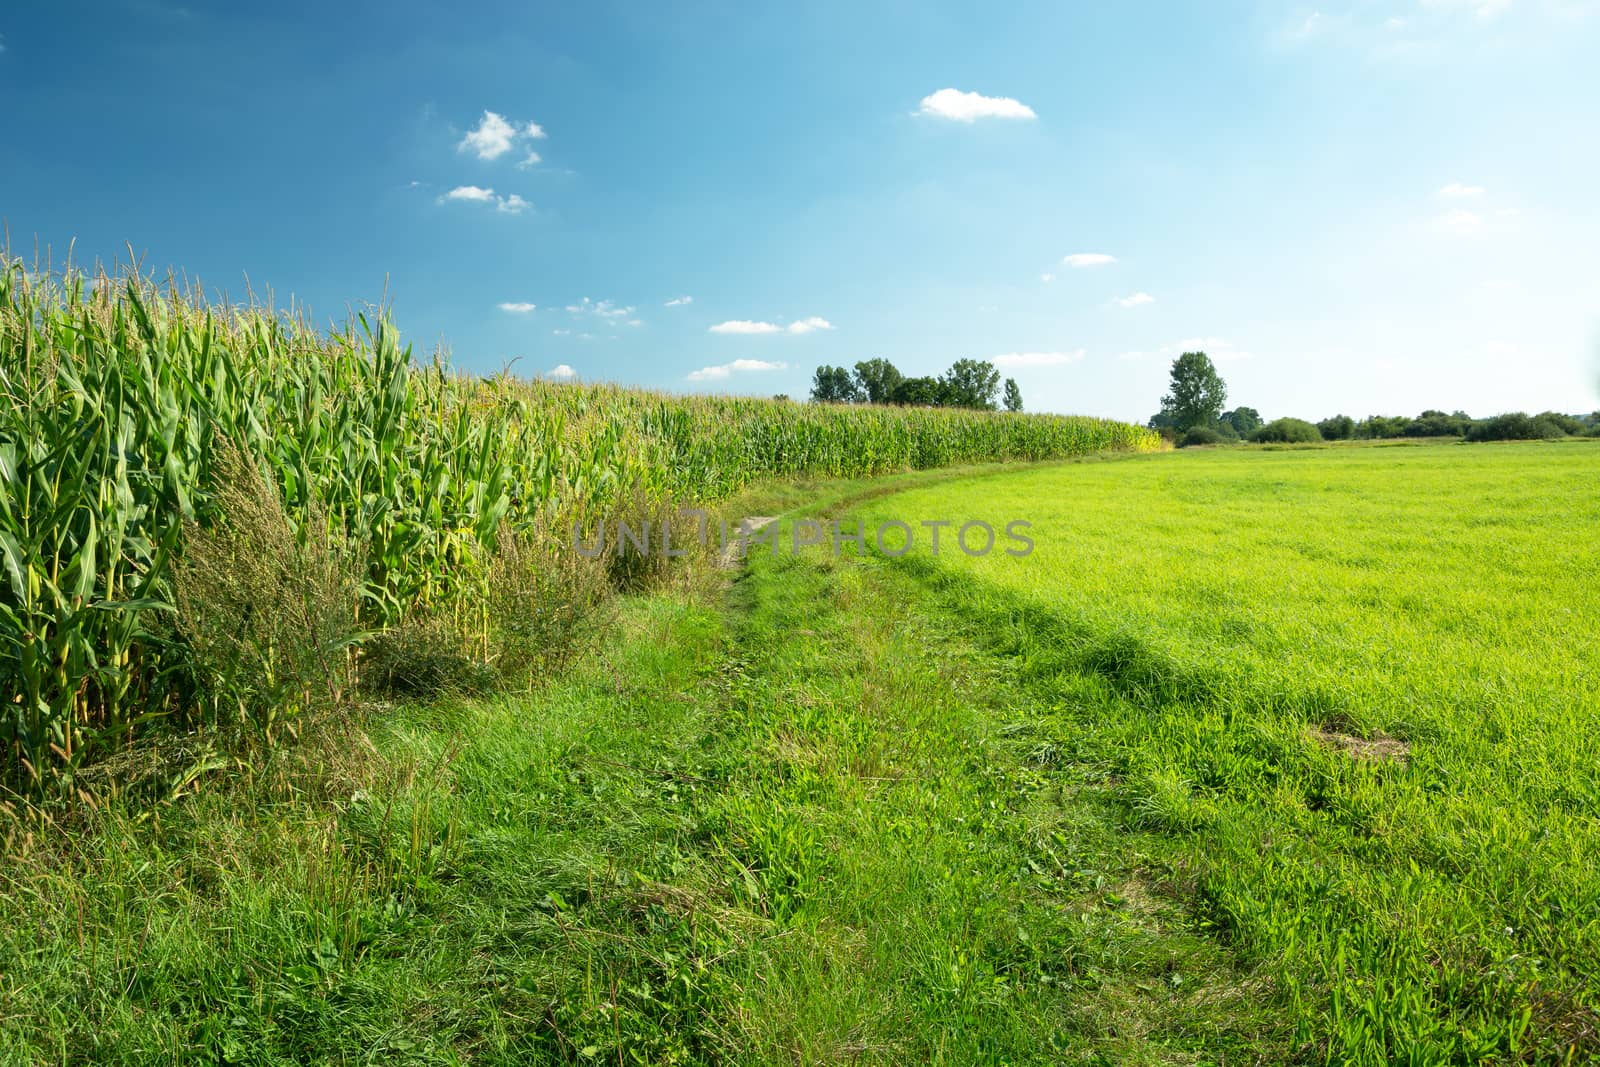 Grassy road next to a cornfield and green meadow, summer rural landscape